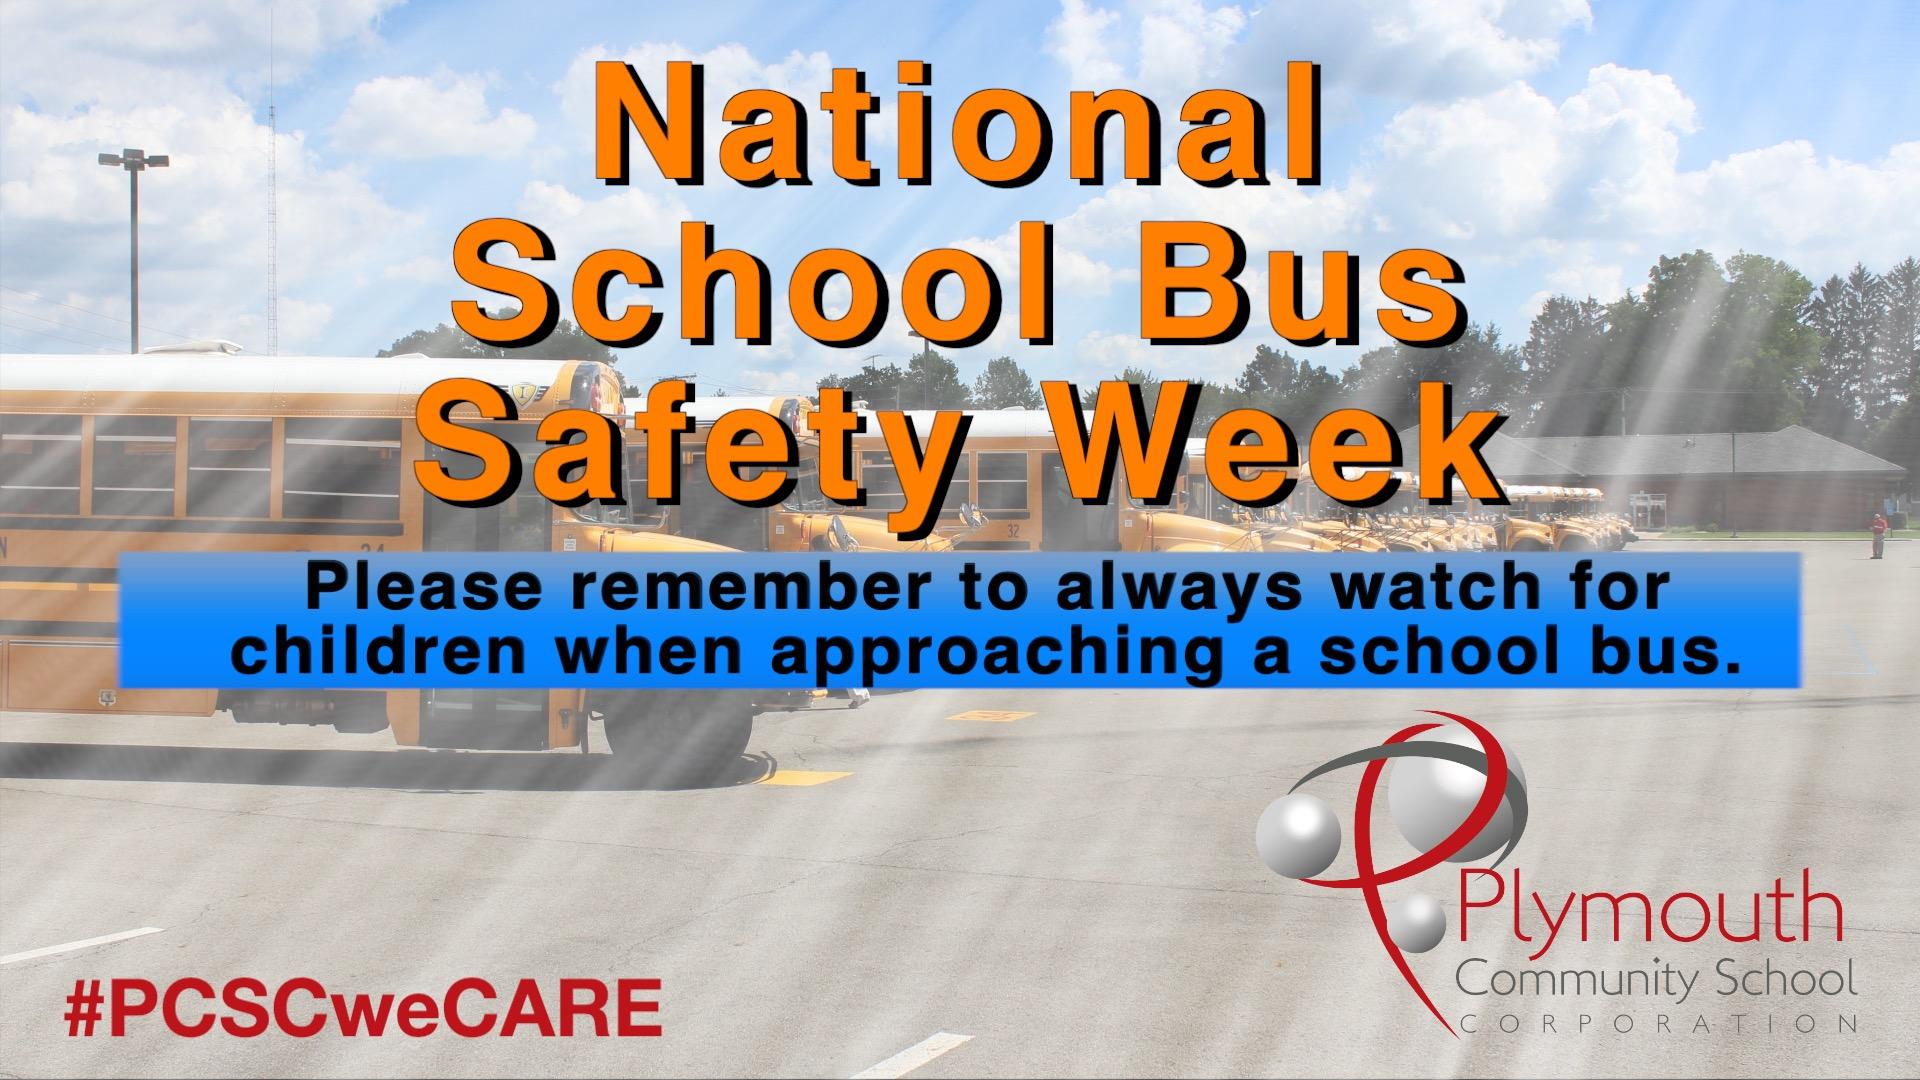 National School Bus Safety Week-Please remember to always watch for children when approaching a school bus. #PCSCweCARE bus image and PCSC logo